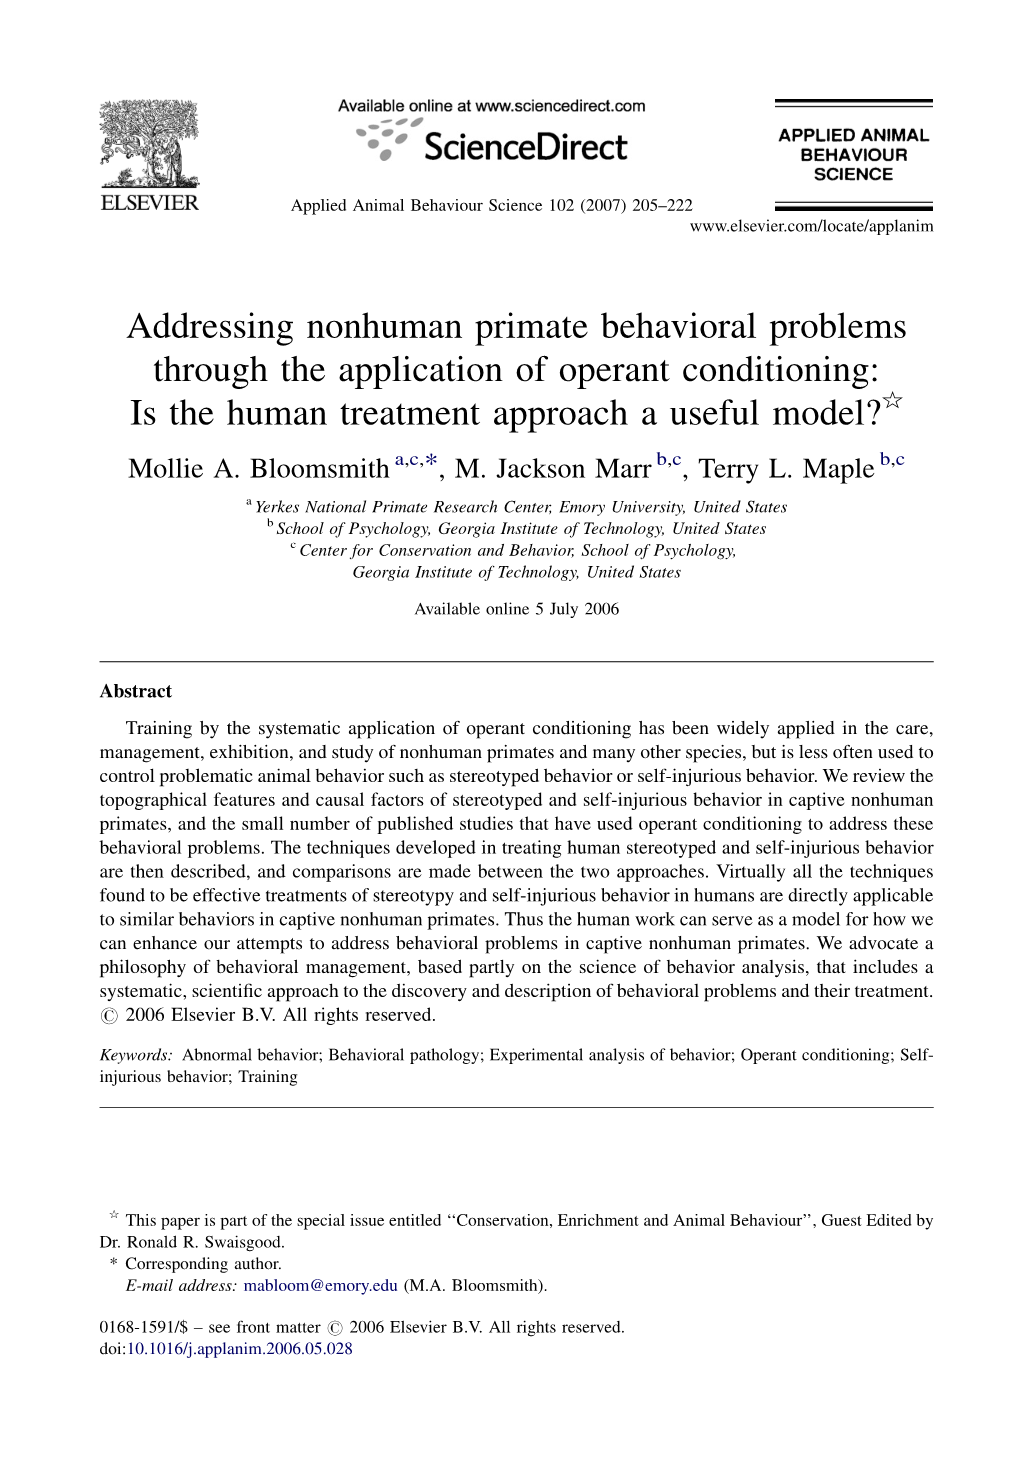 Addressing Nonhuman Primate Behavioral Problems Through the Application of Operant Conditioning: Is the Human Treatment Approach a Useful Model?§ Mollie A